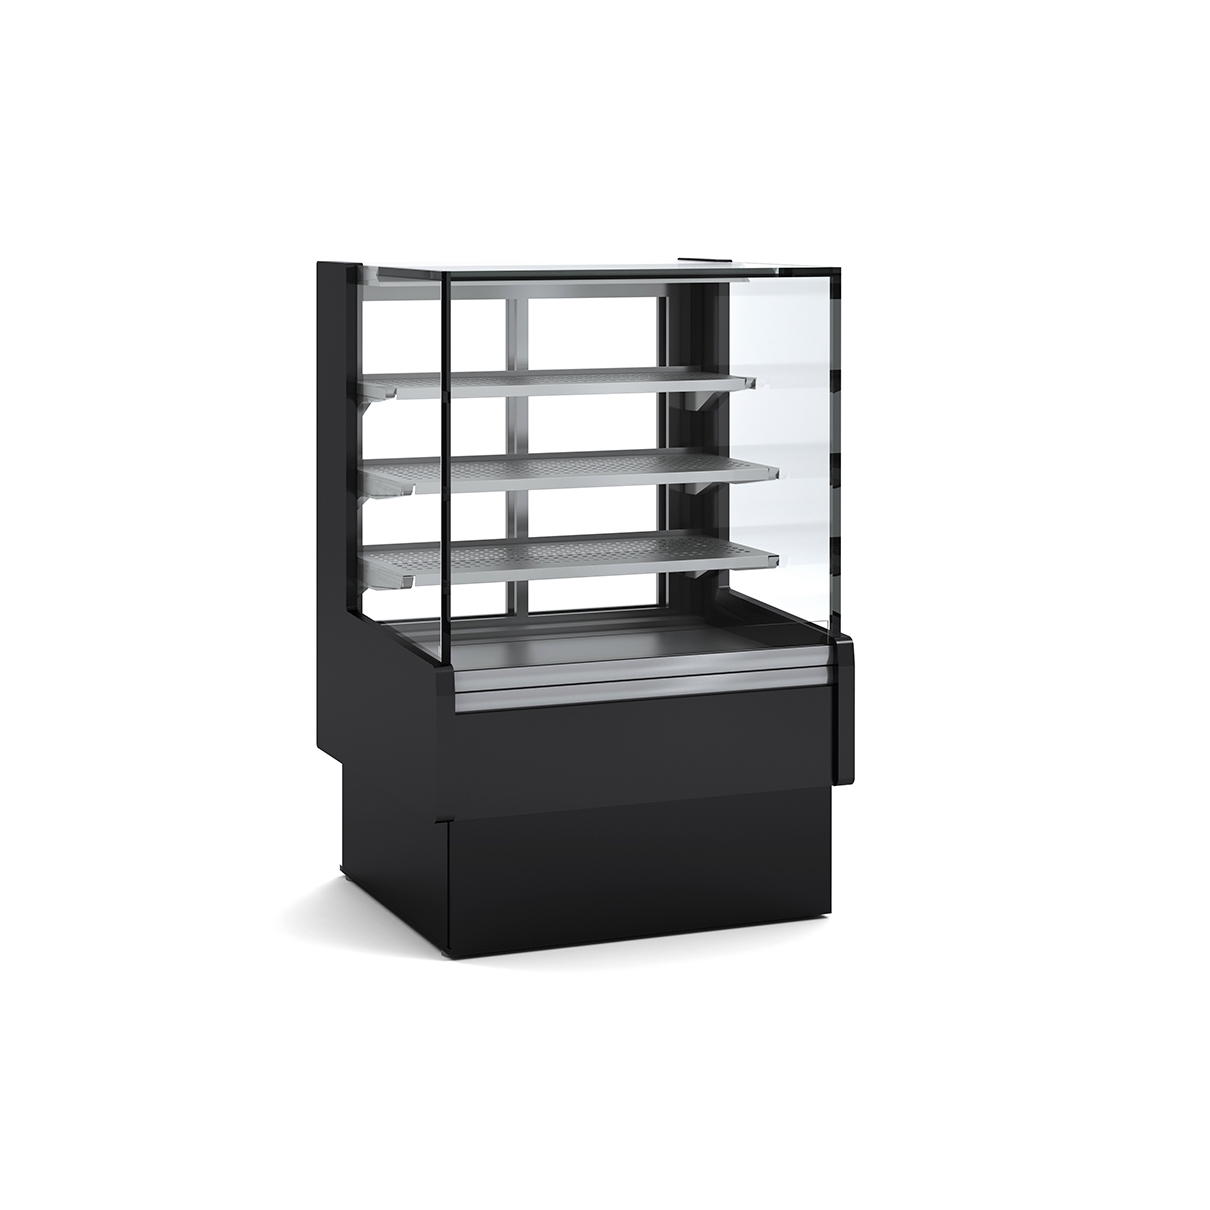 HOT VENTILATED DISPLAY CABINET VV-HE-R